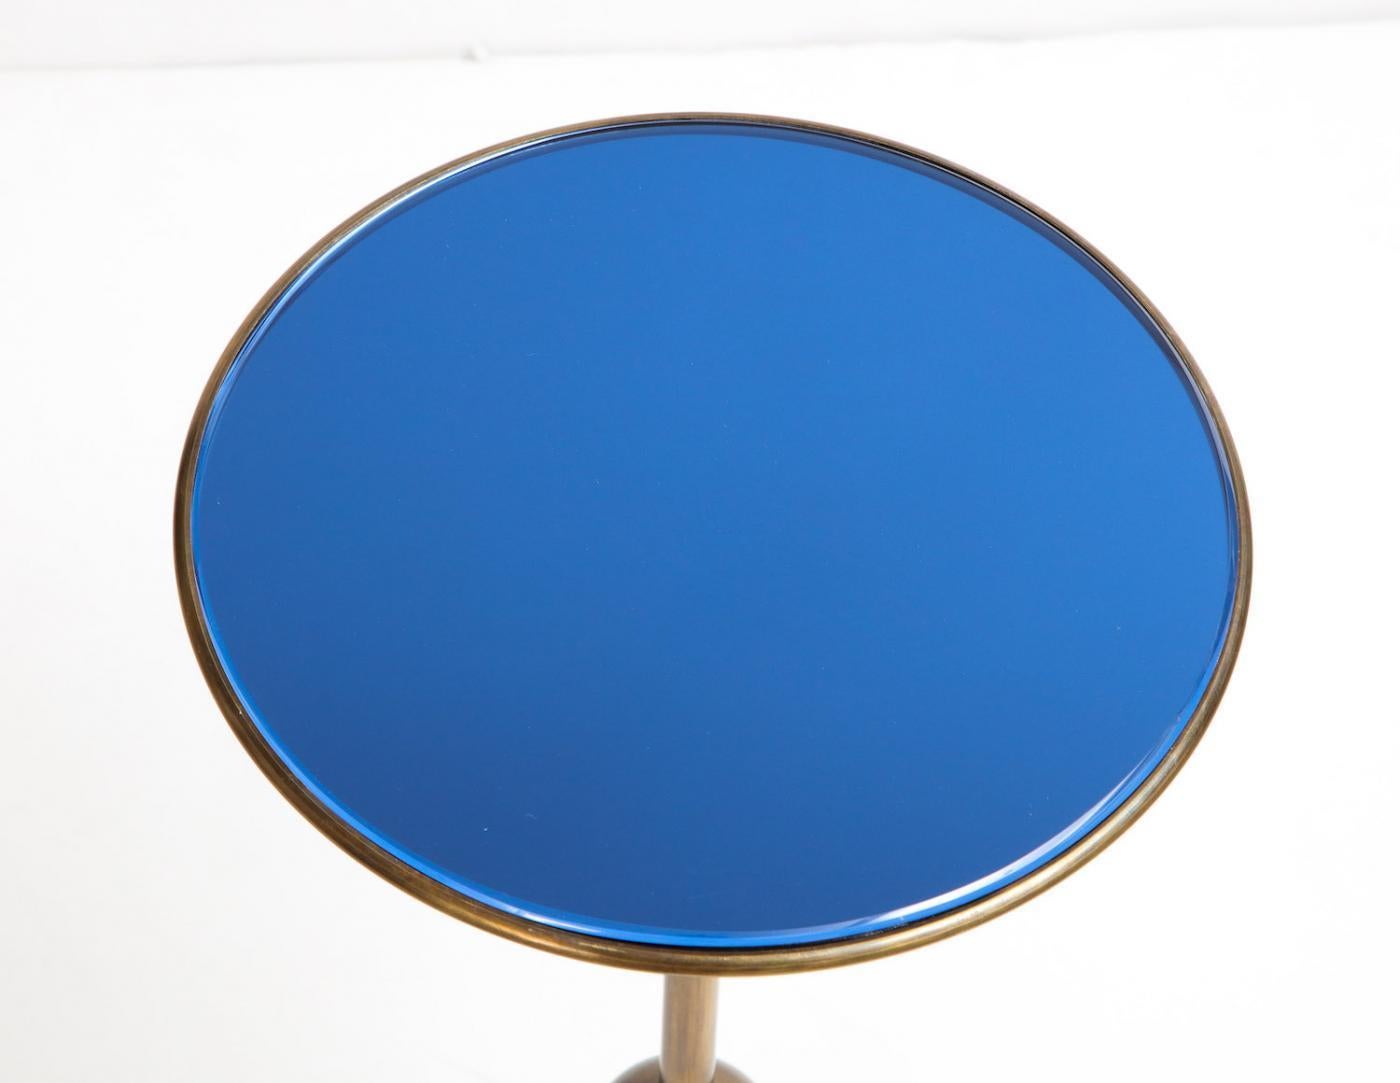 Nicely scaled, brass pedestal table with floating dented orb and inset sapphire-blue mirrored top. A rare and early example of this model. Very good condition. Mirrored top may have been replaced. Wear and oxidation to metal.
Published: Osvaldo